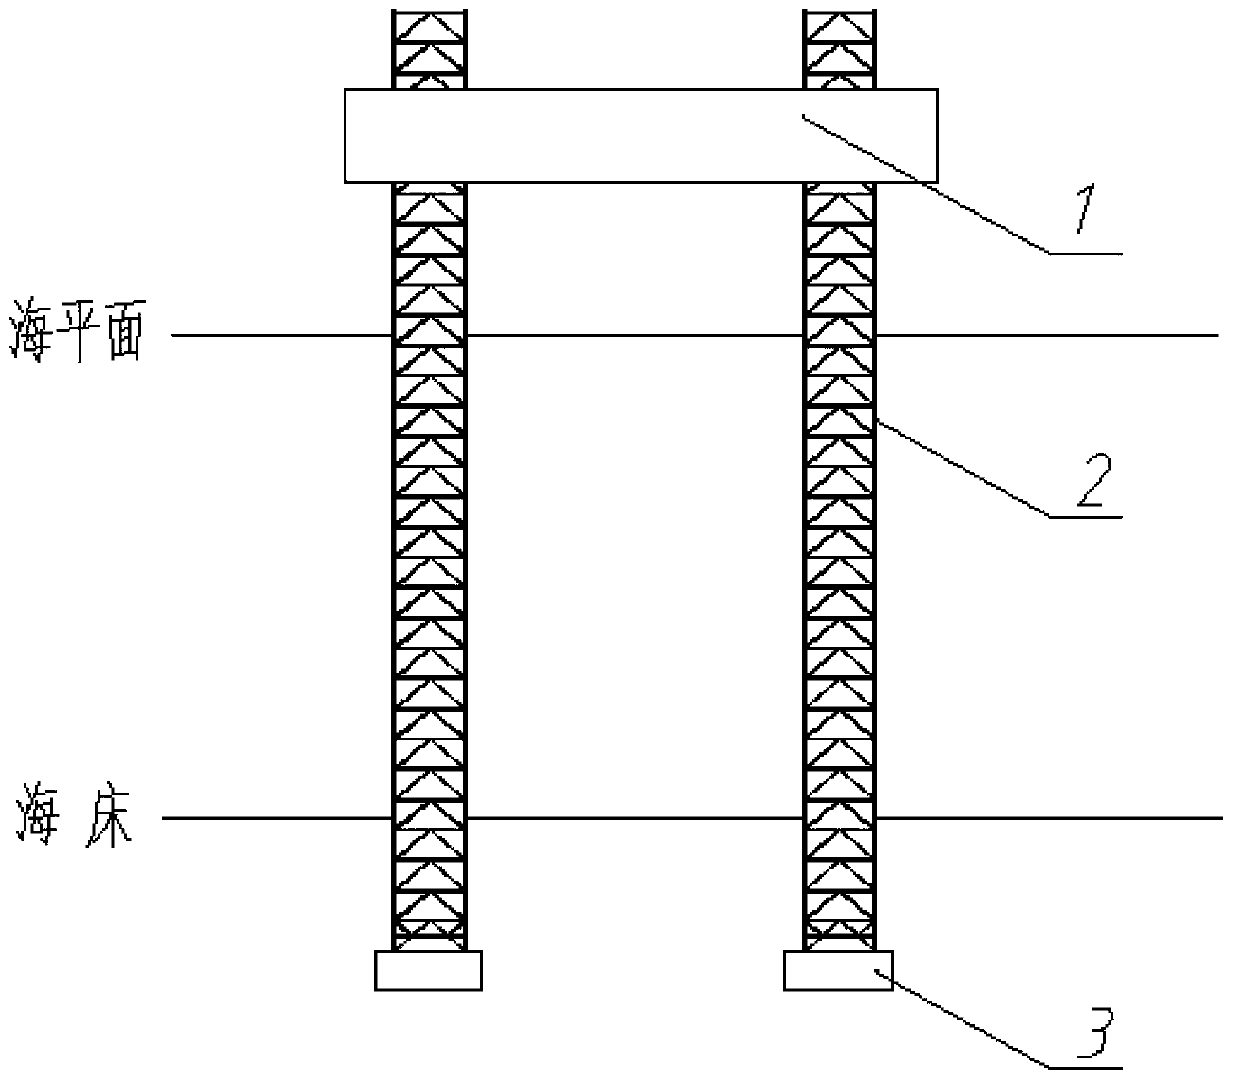 Splicing trussed type pile leg device